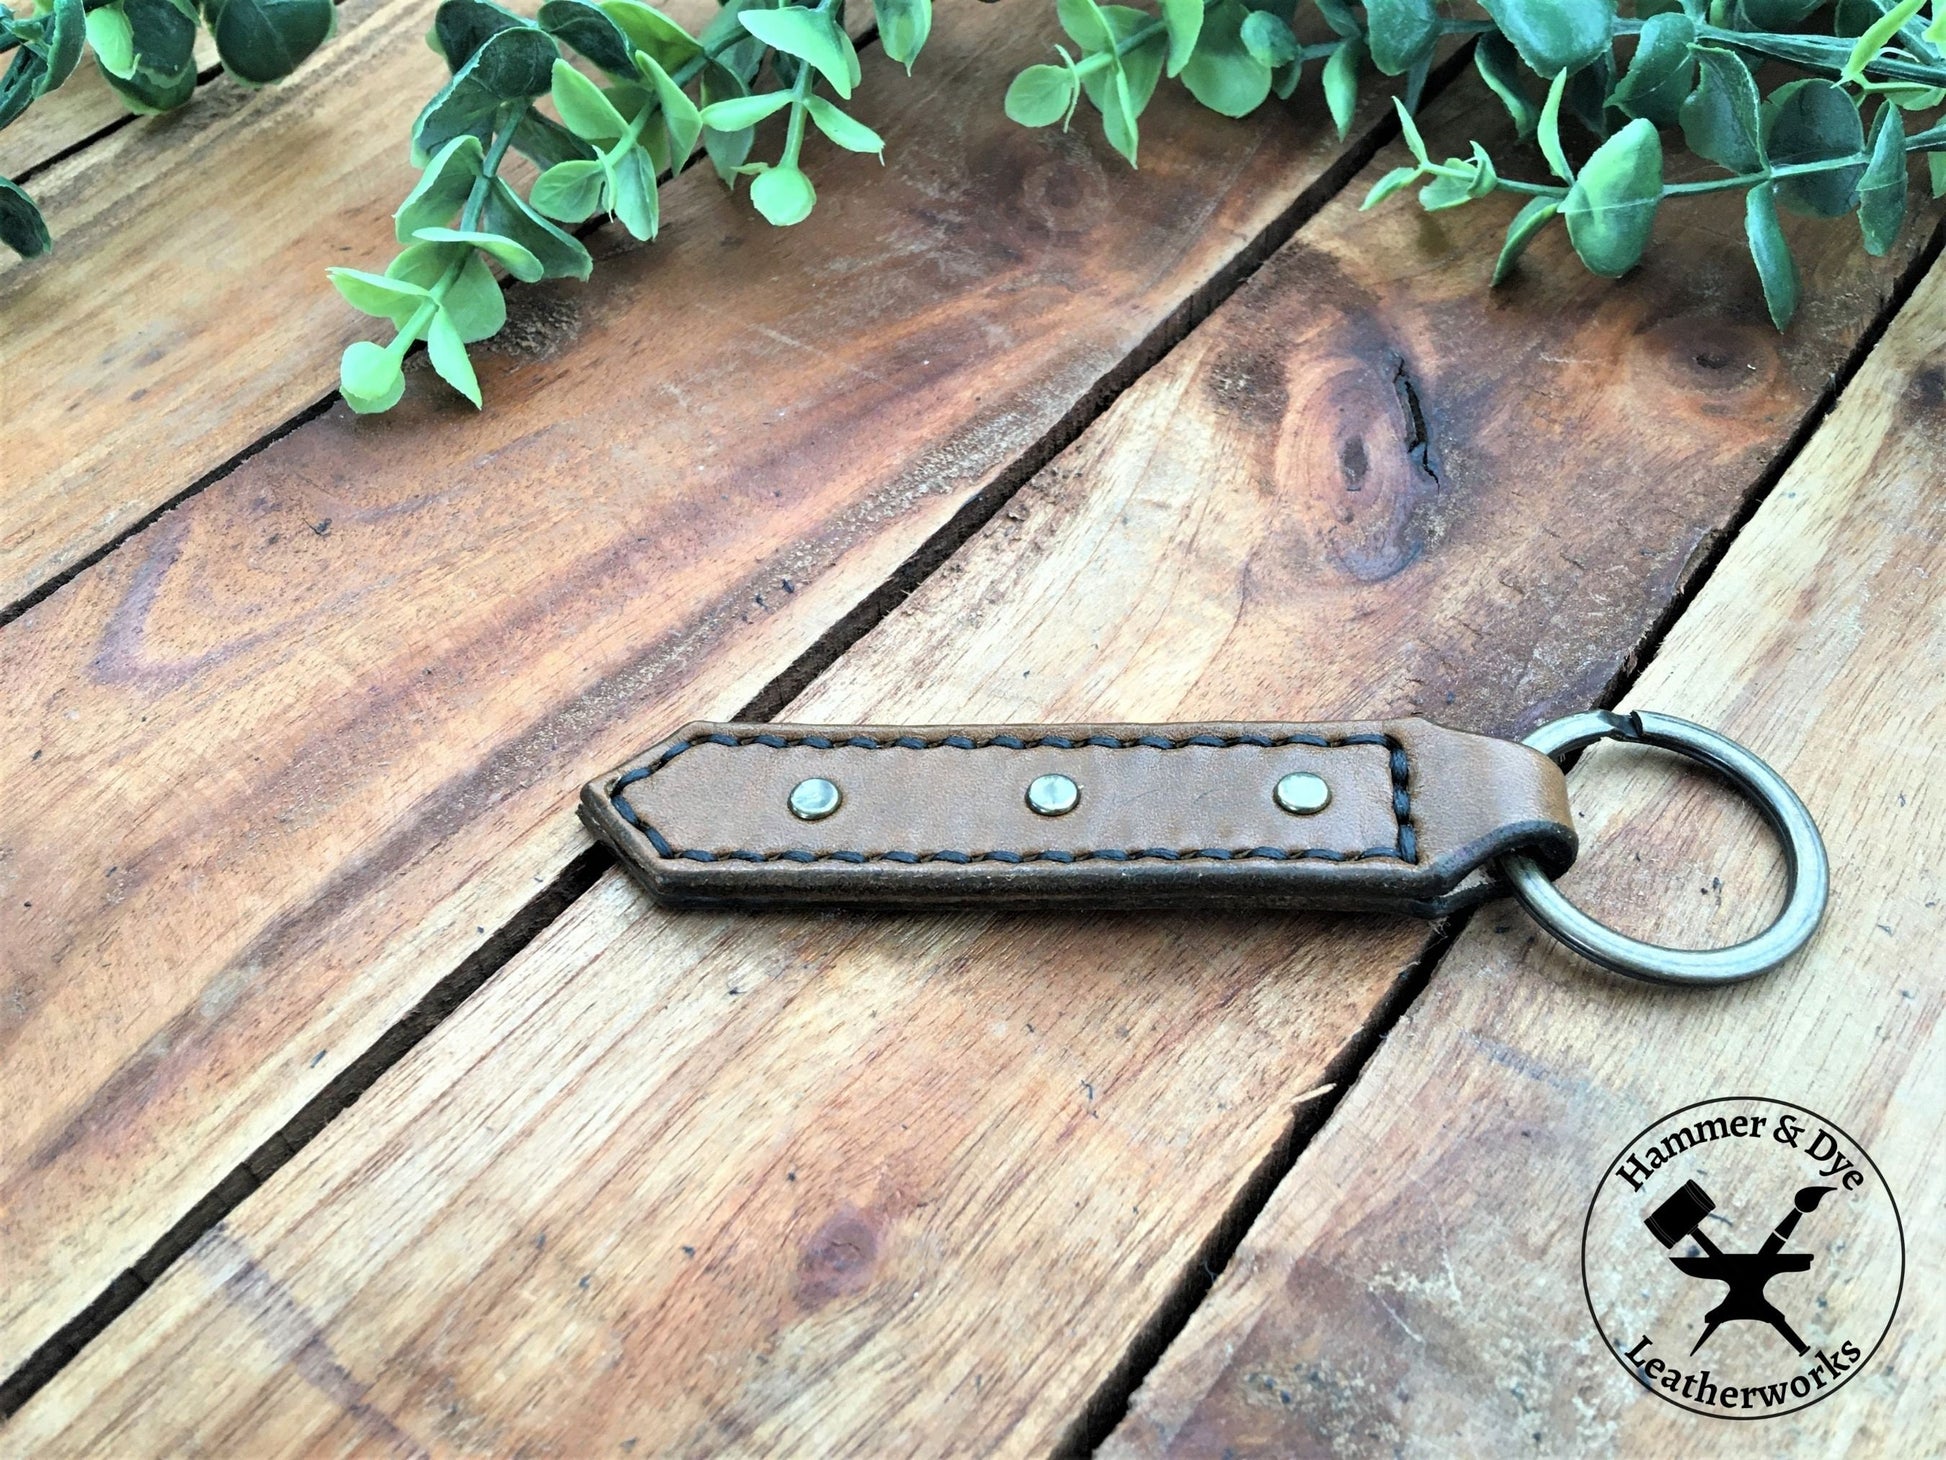 Handmade Antique Brown Leather Studded Keychain with Black Stitching